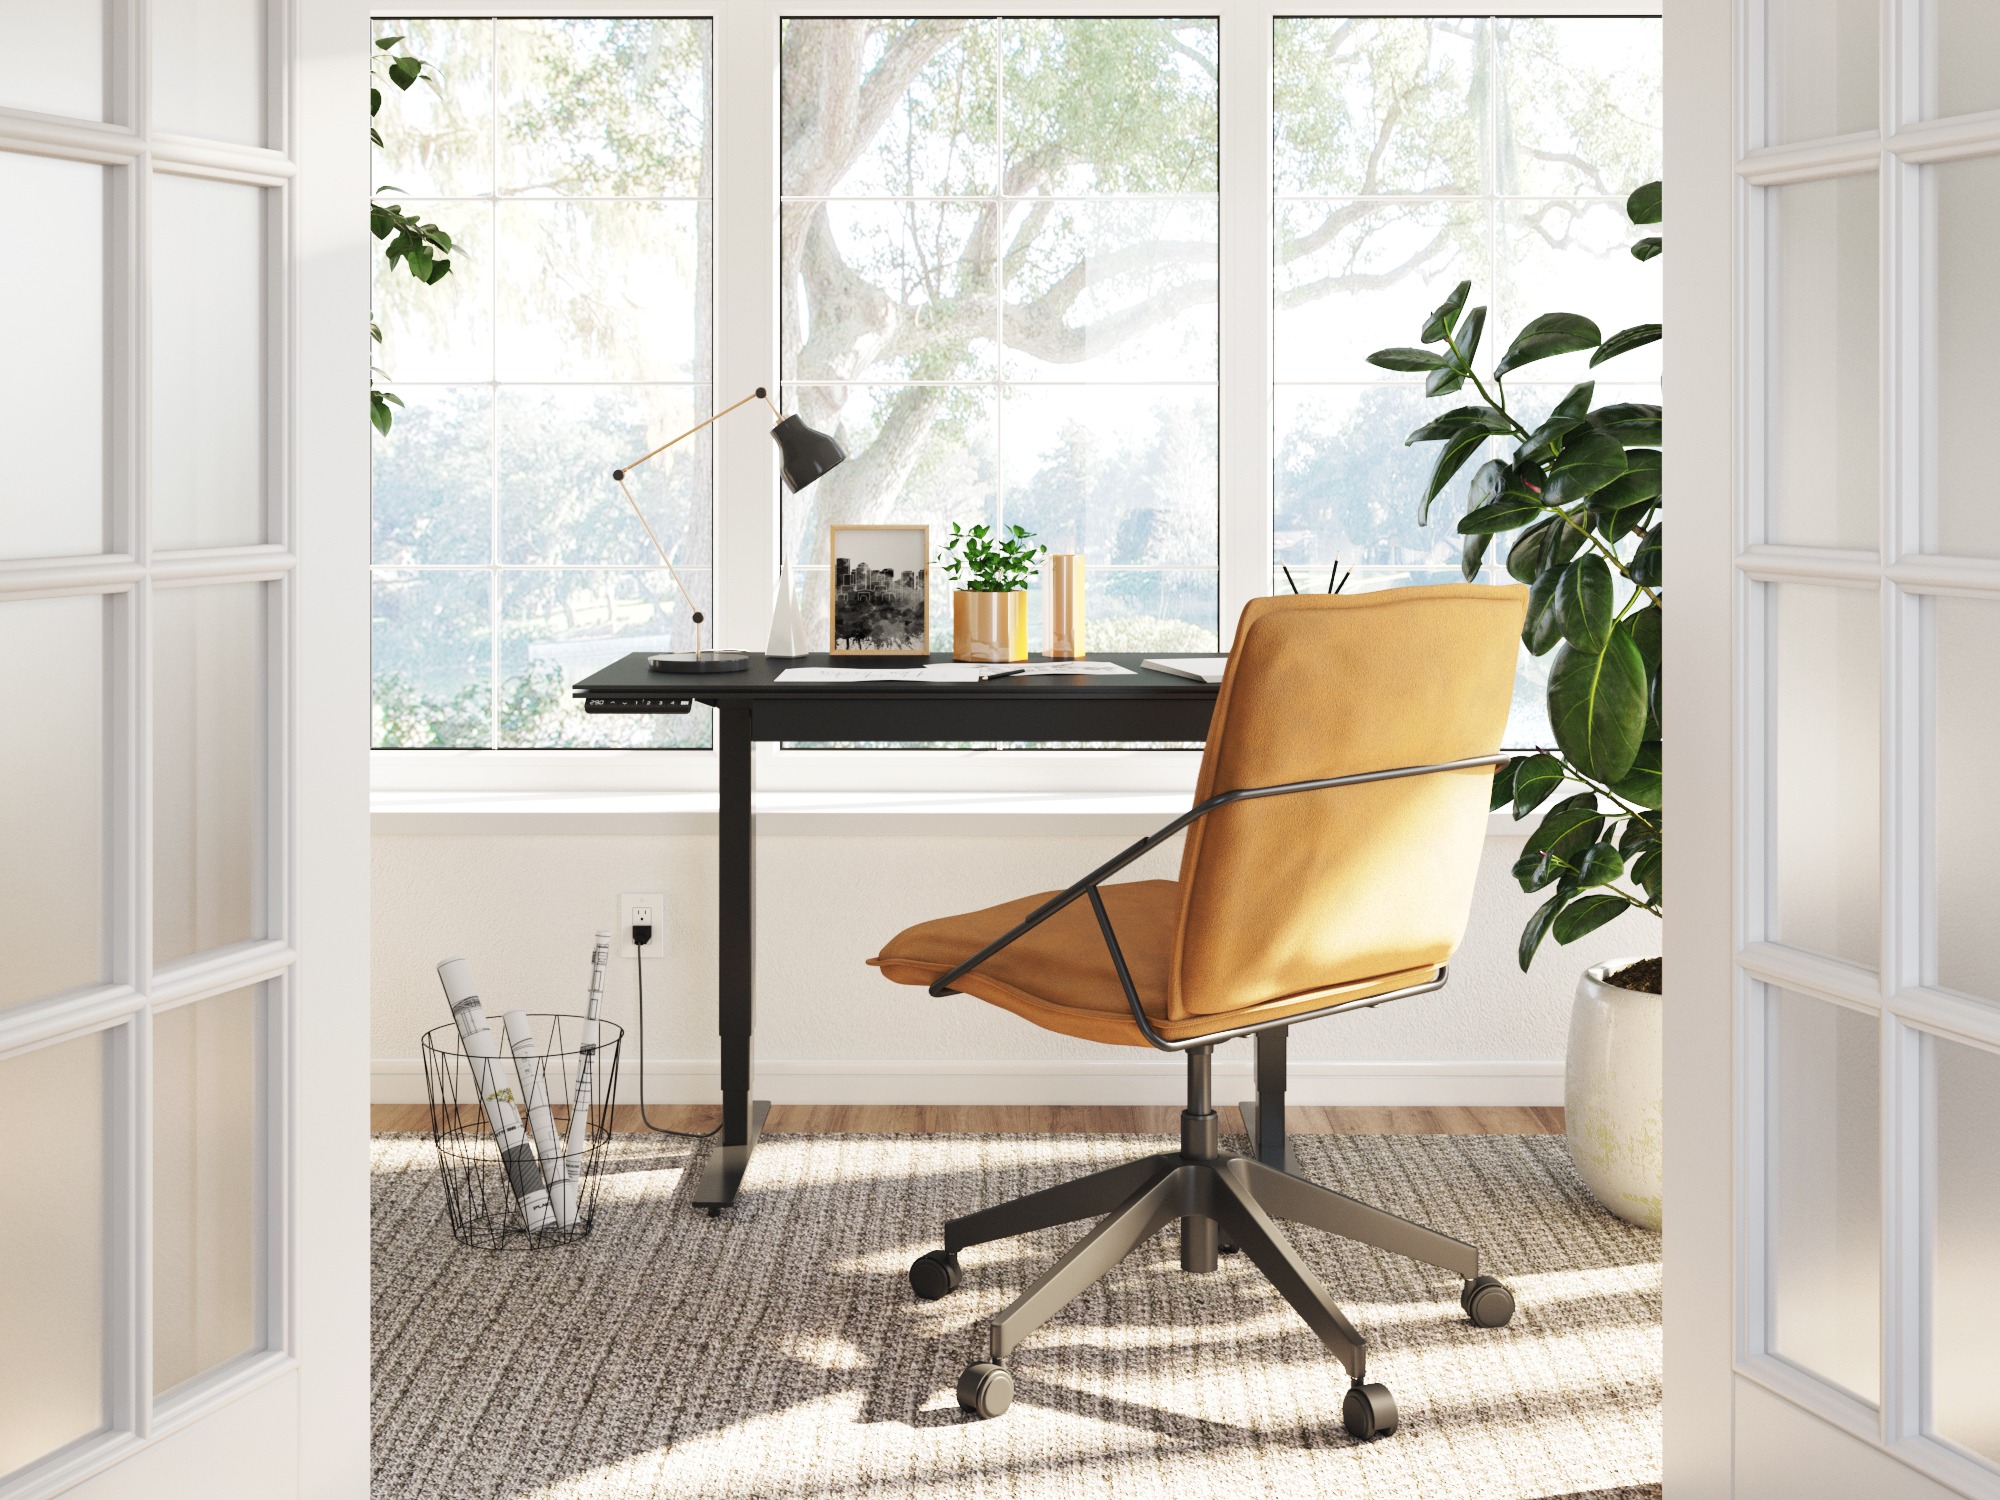 How To Choose A Color Scheme For Your Home Office